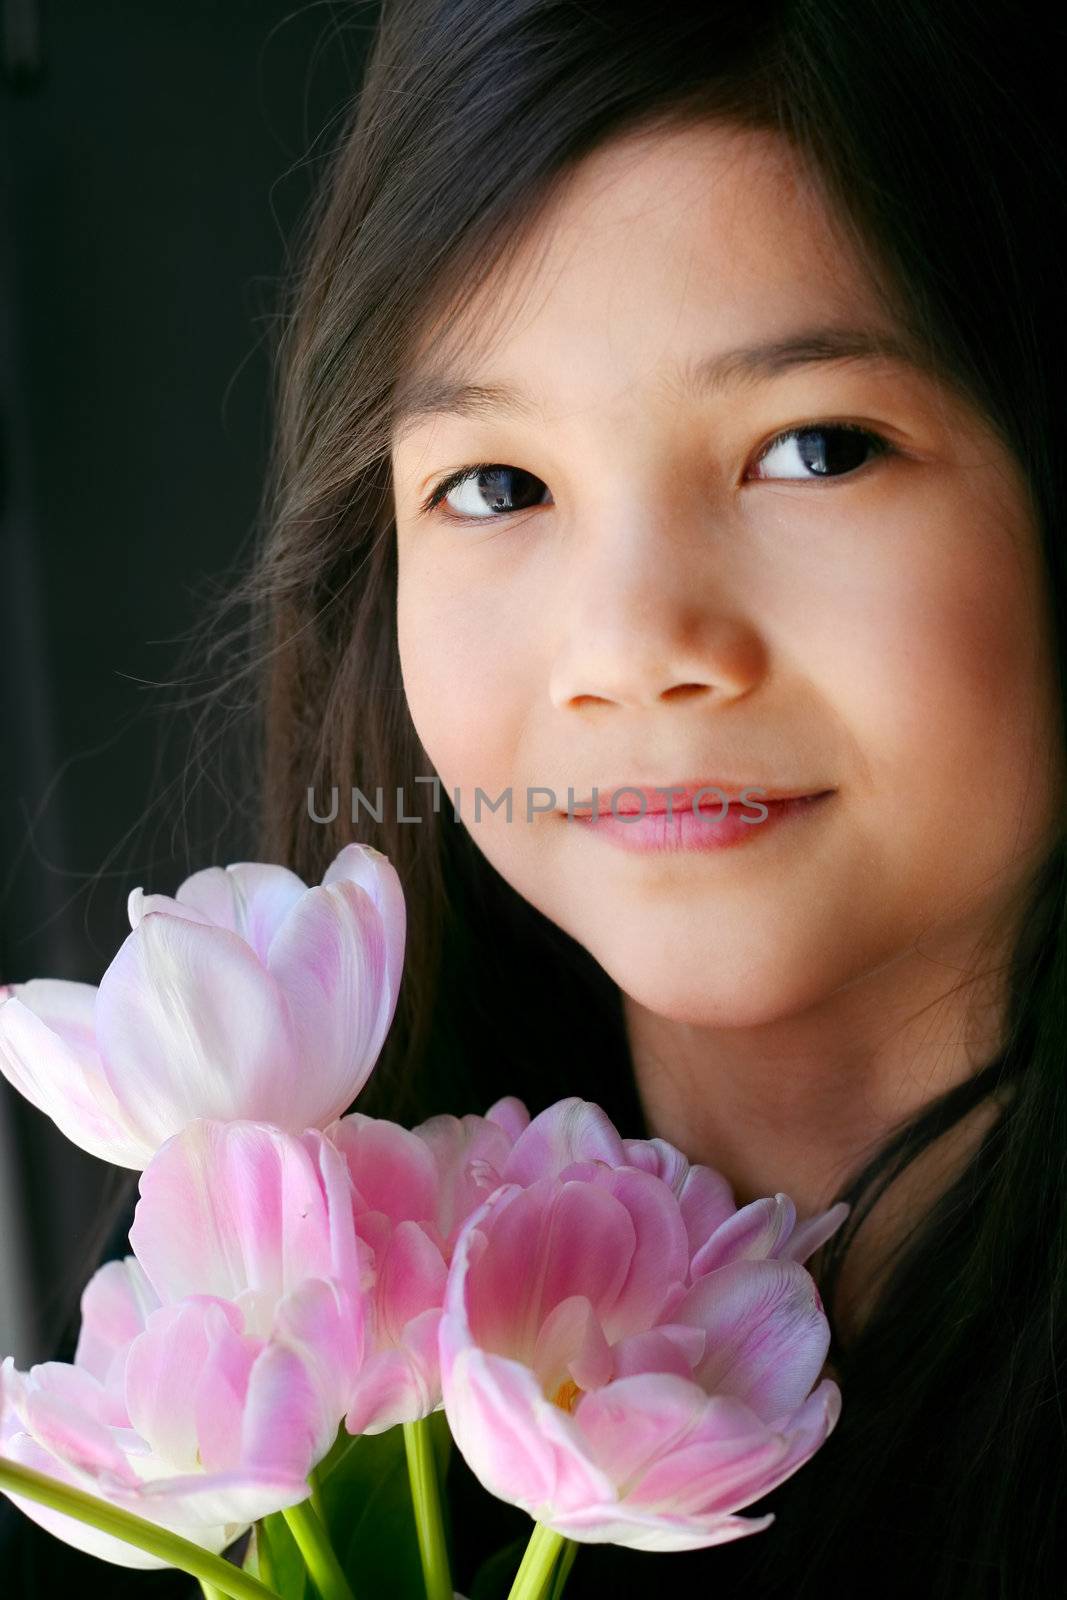 Beautiful little girl with pink tulips by jarenwicklund